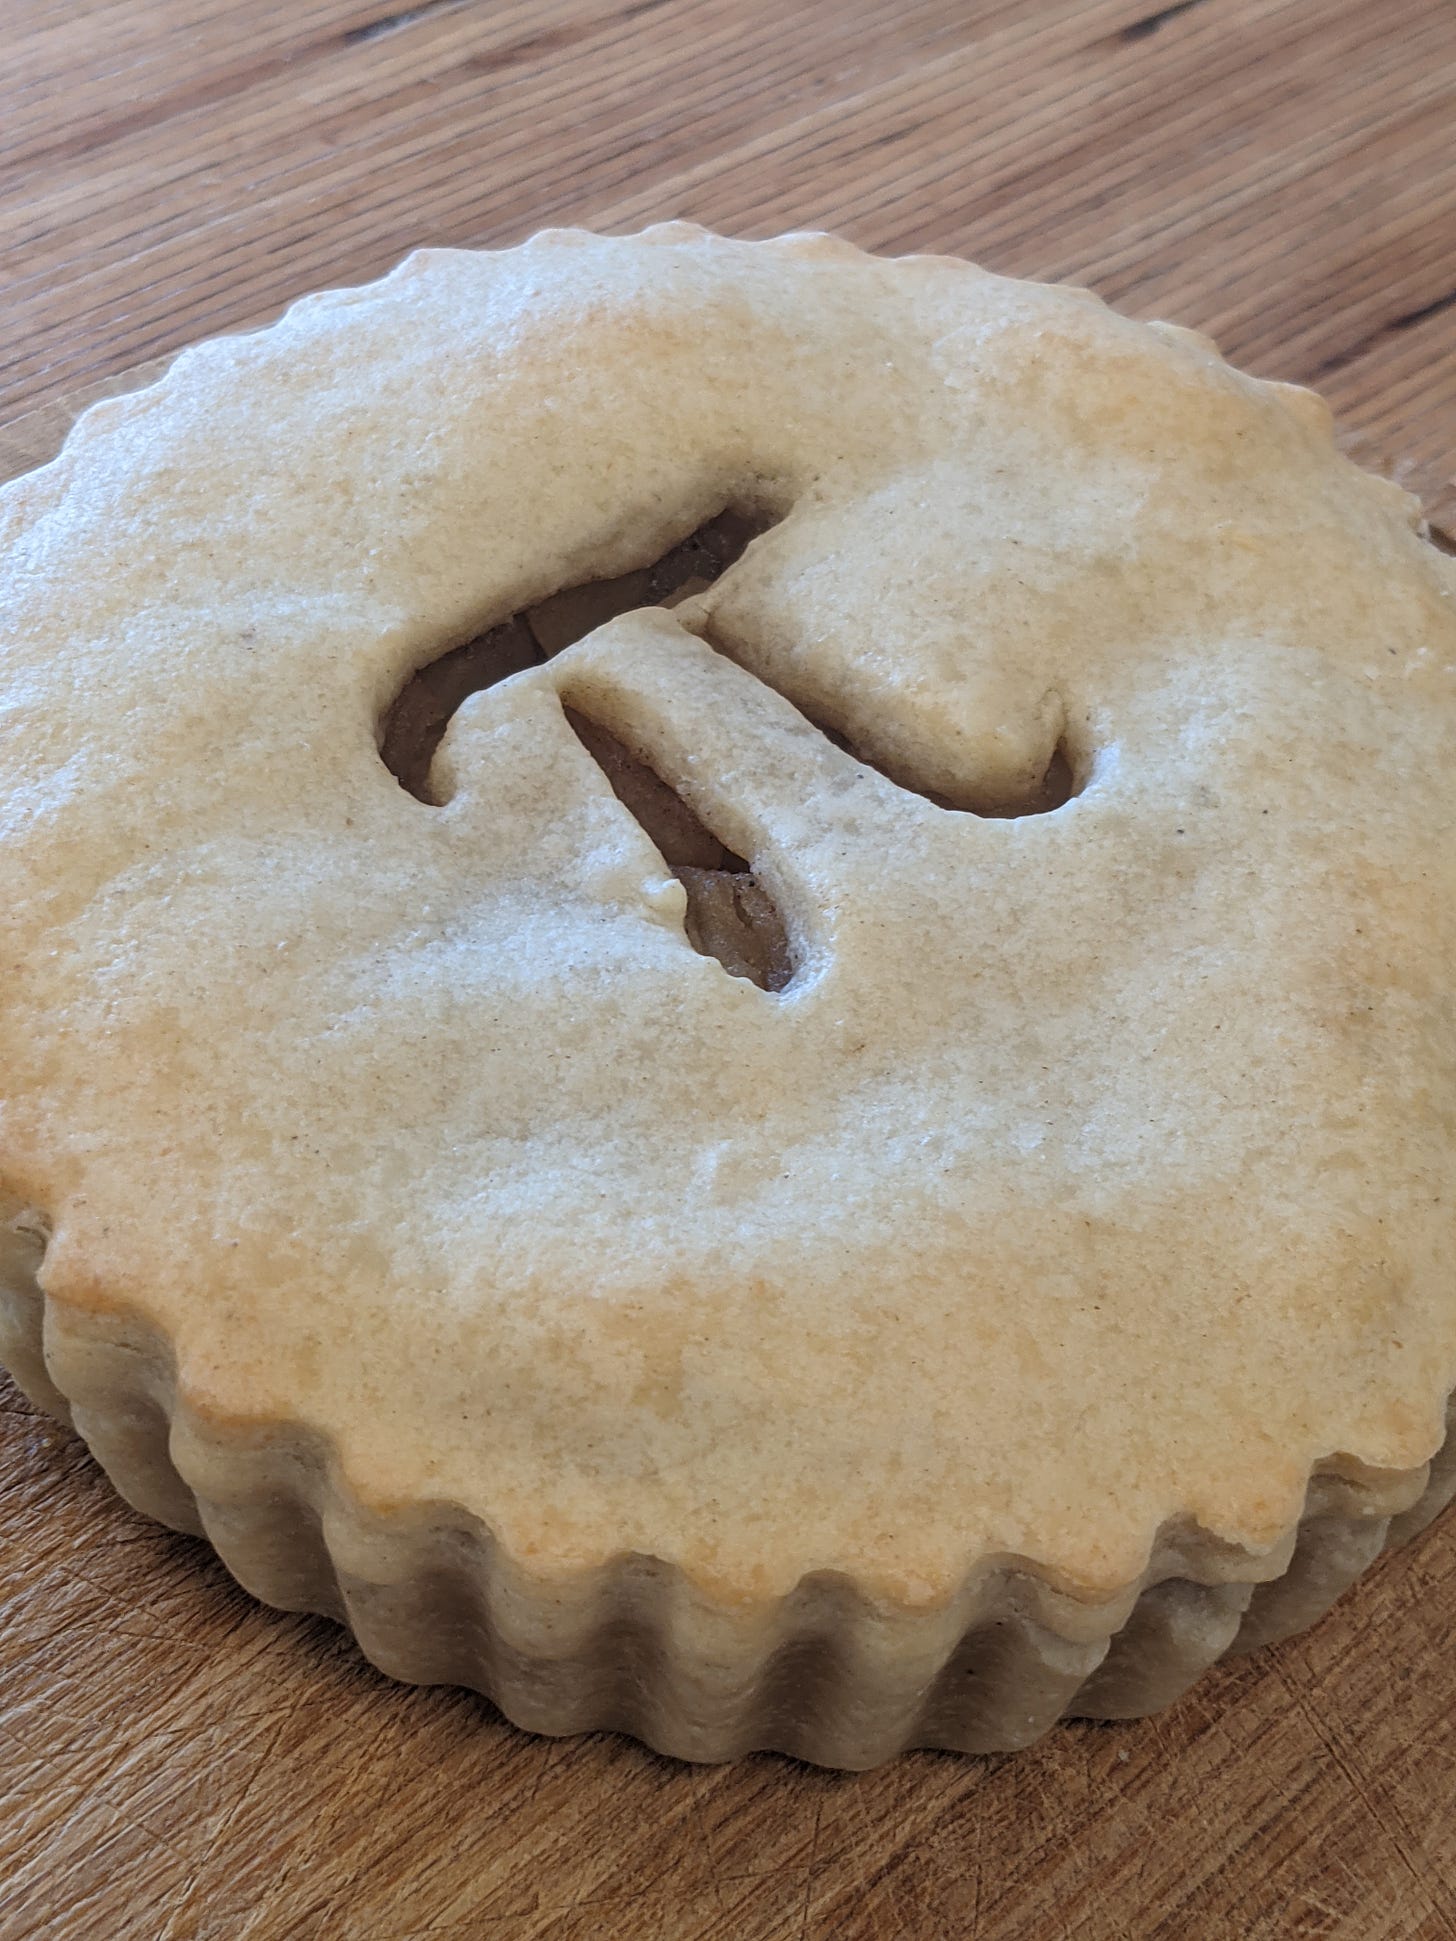 An apple pie with the mathematical symbol pi carved in it